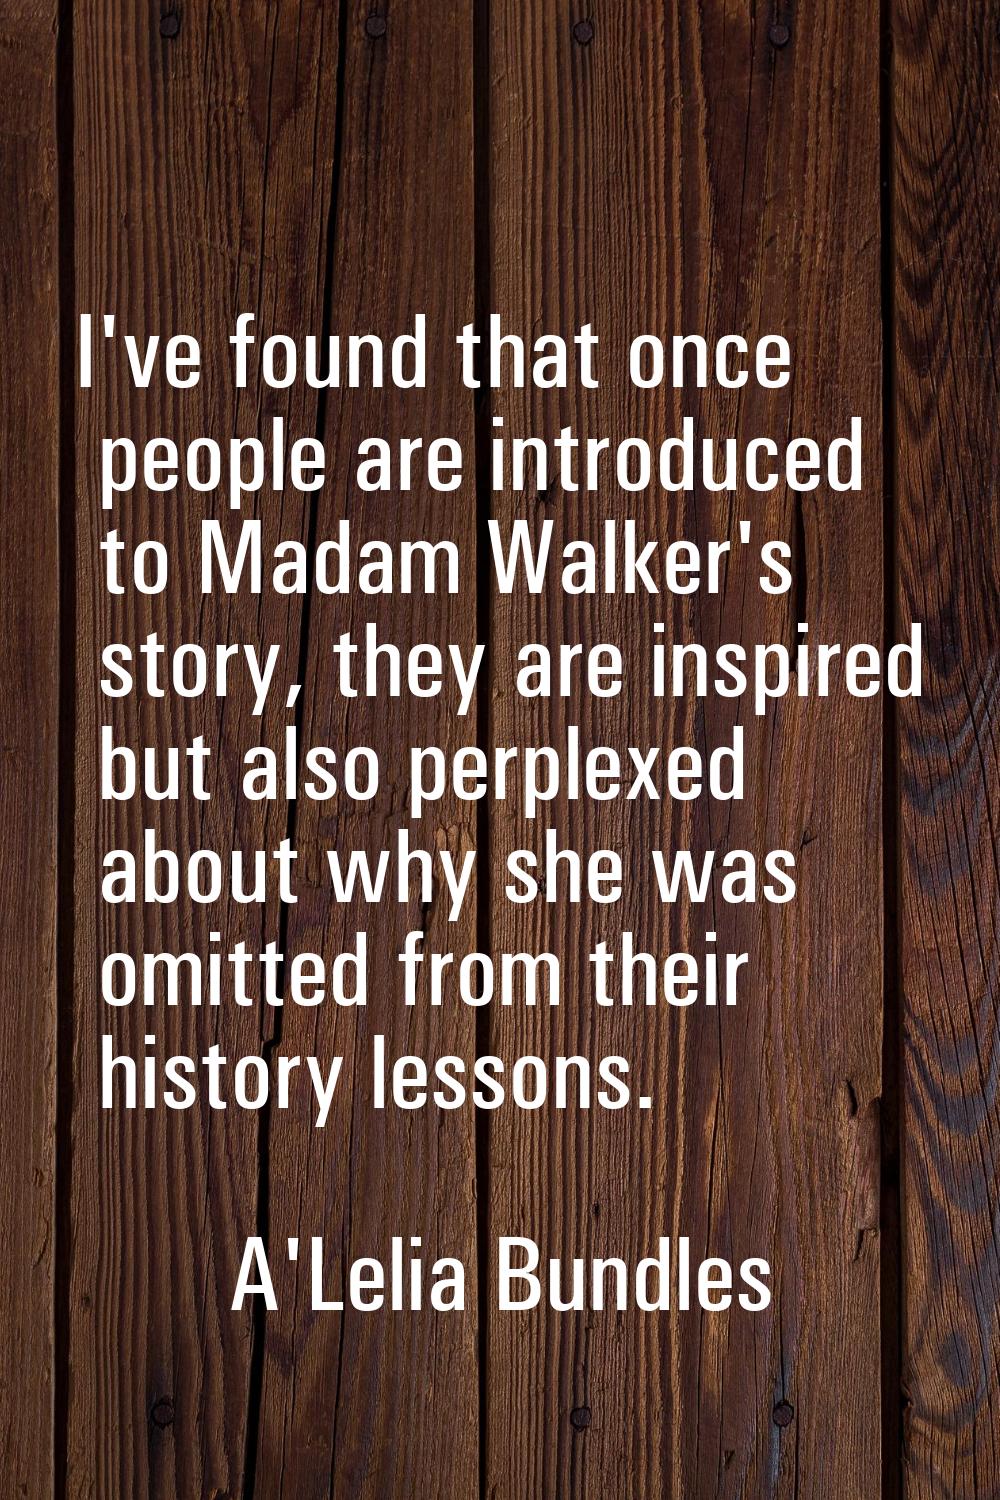 I've found that once people are introduced to Madam Walker's story, they are inspired but also perp